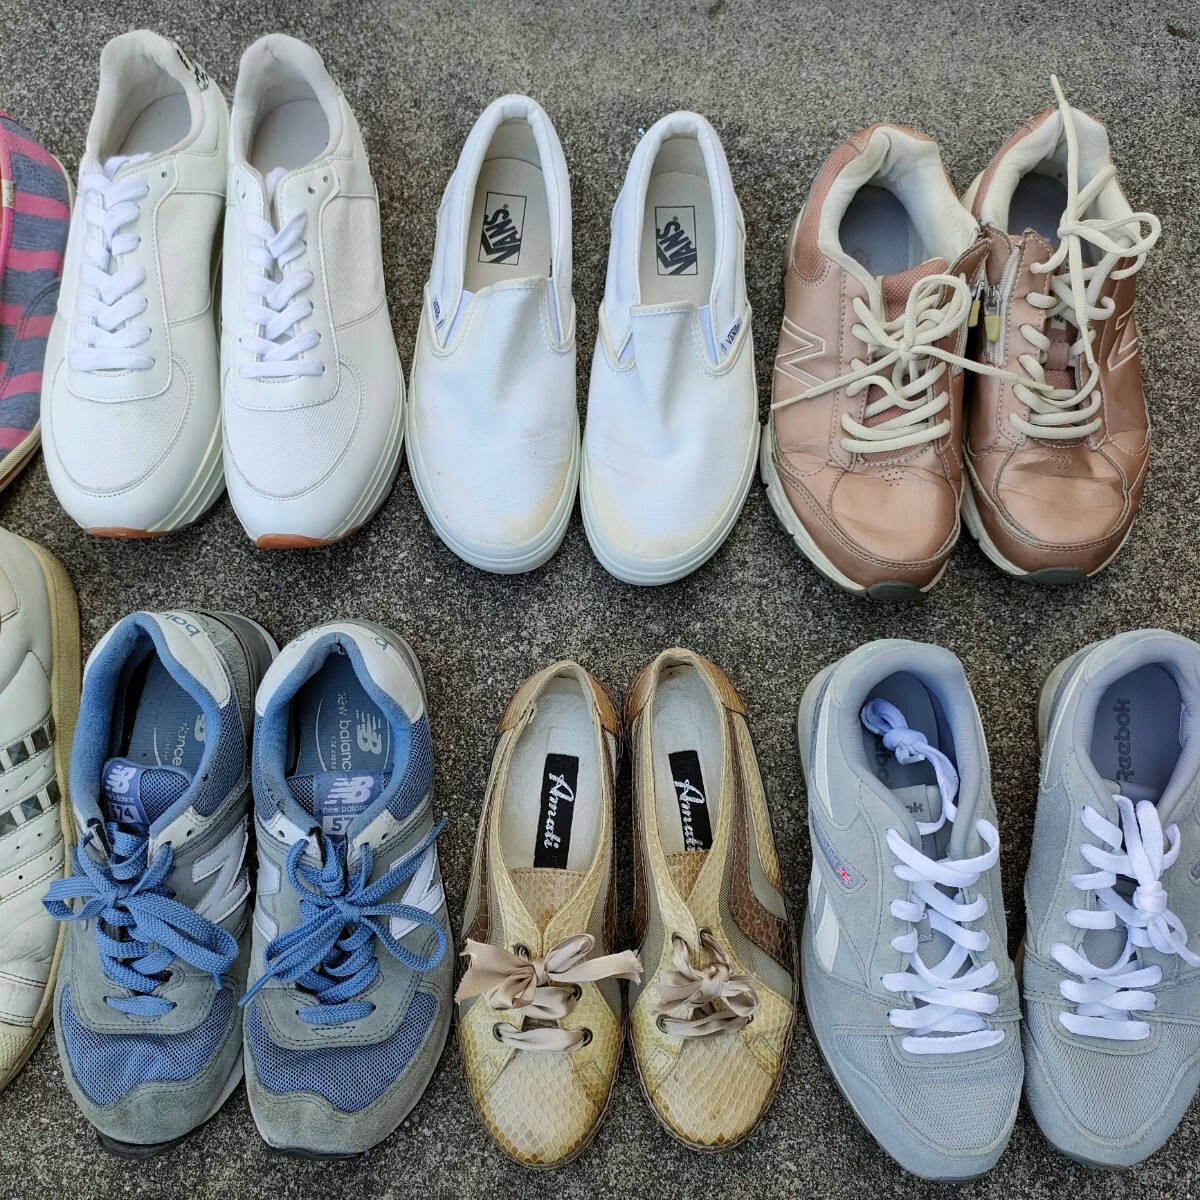 1 jpy Prada Nike New balance Polo Vans etc. sneakers 30 point set sale lady's men's mixing recommended 